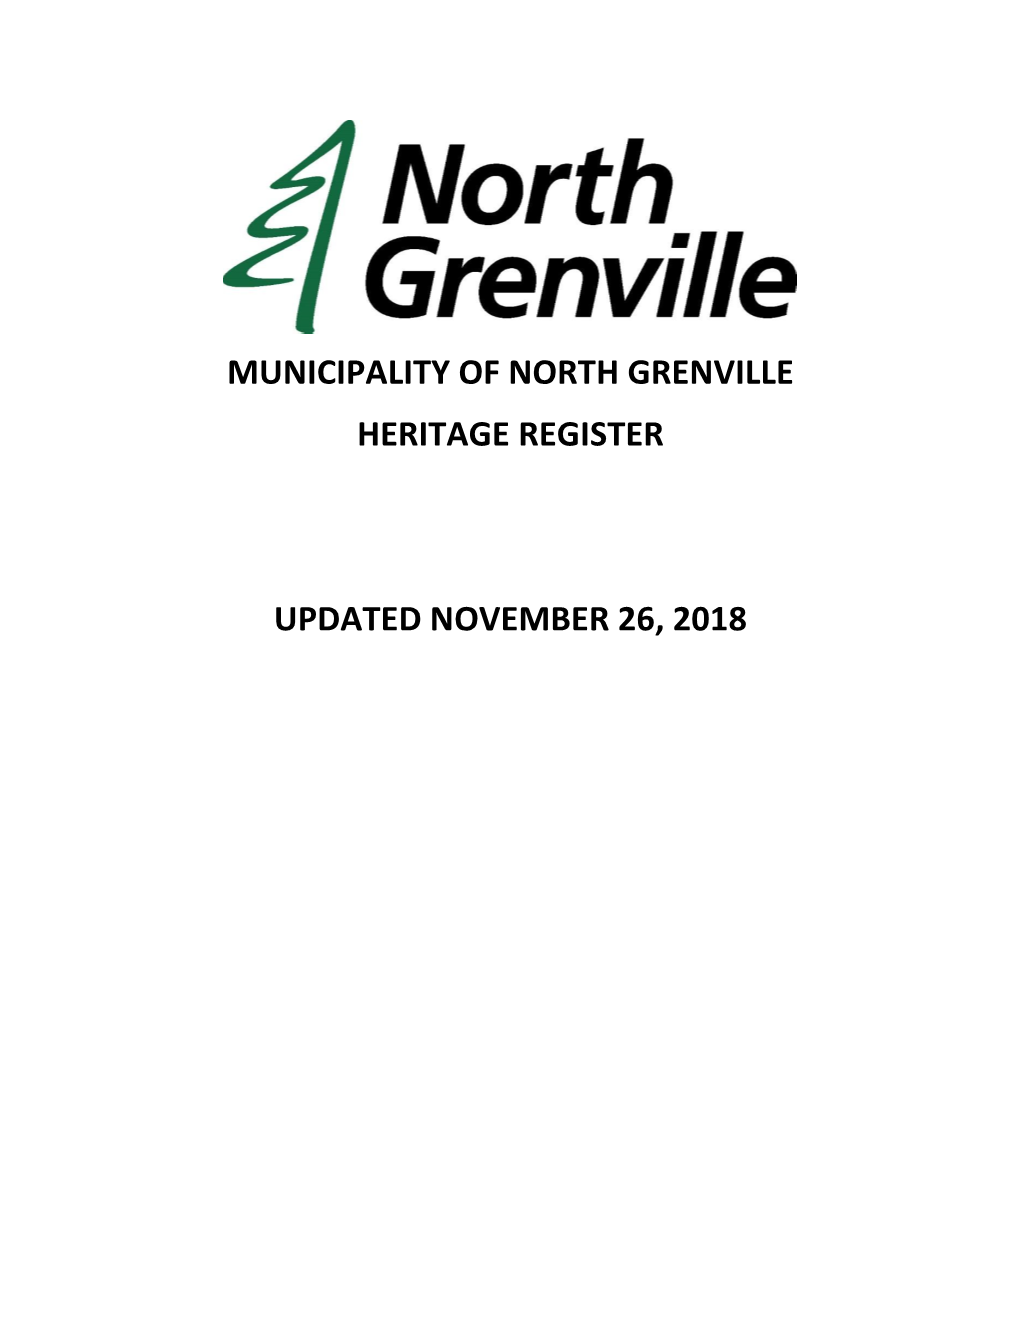 Municipality of North Grenville Heritage Register